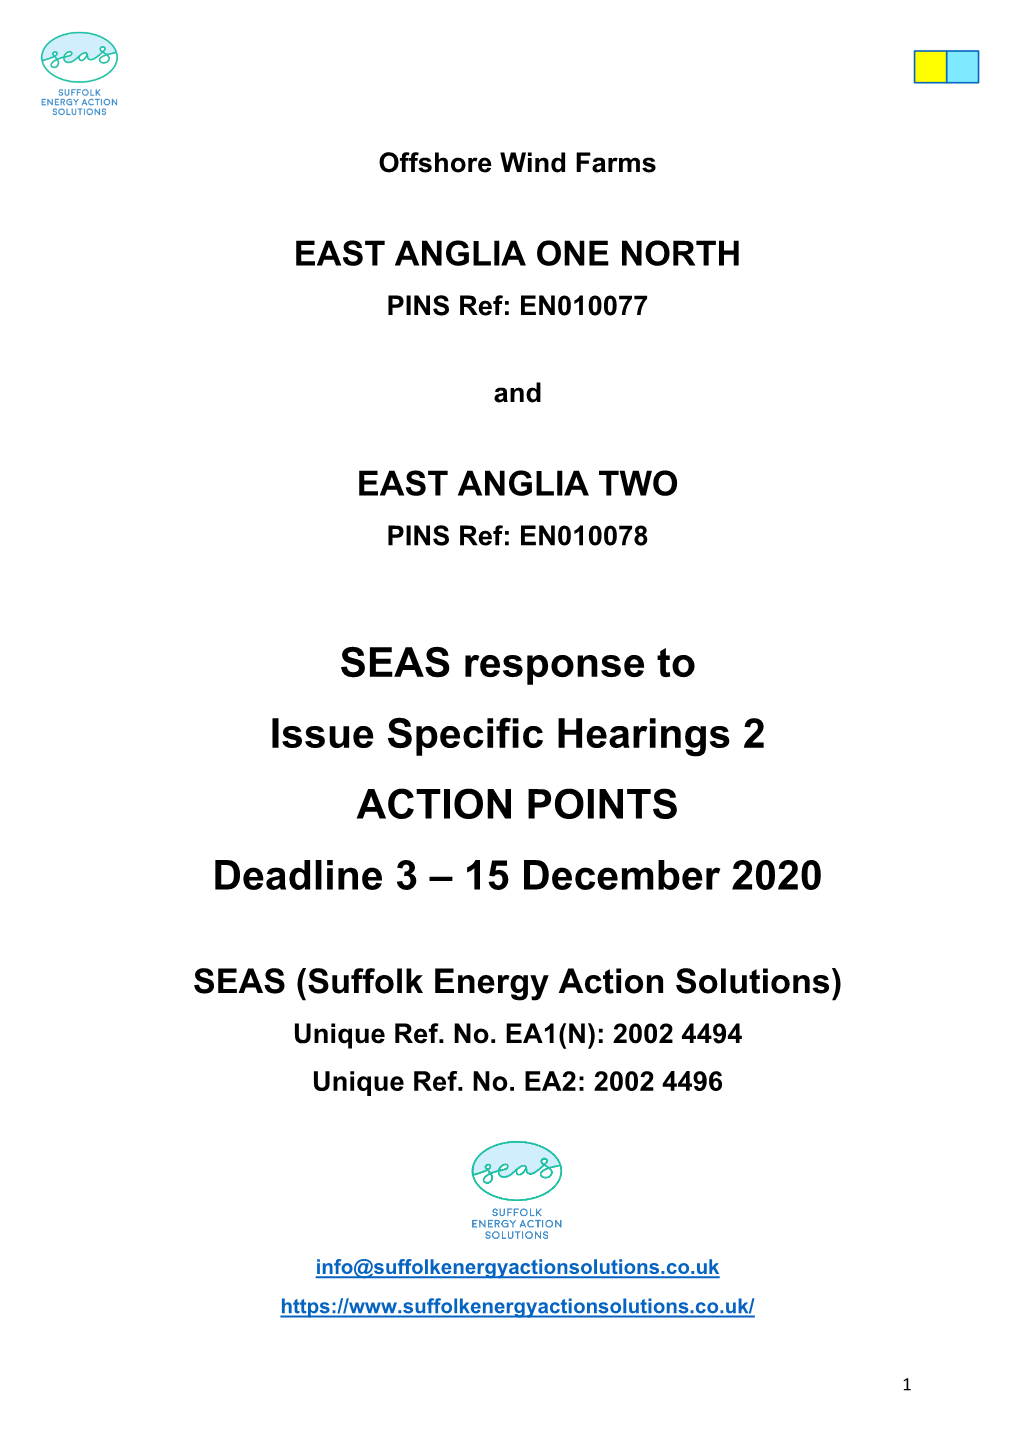 SEAS Response to Issue Specific Hearings 2 ACTION POINTS Deadline 3 – 15 December 2020